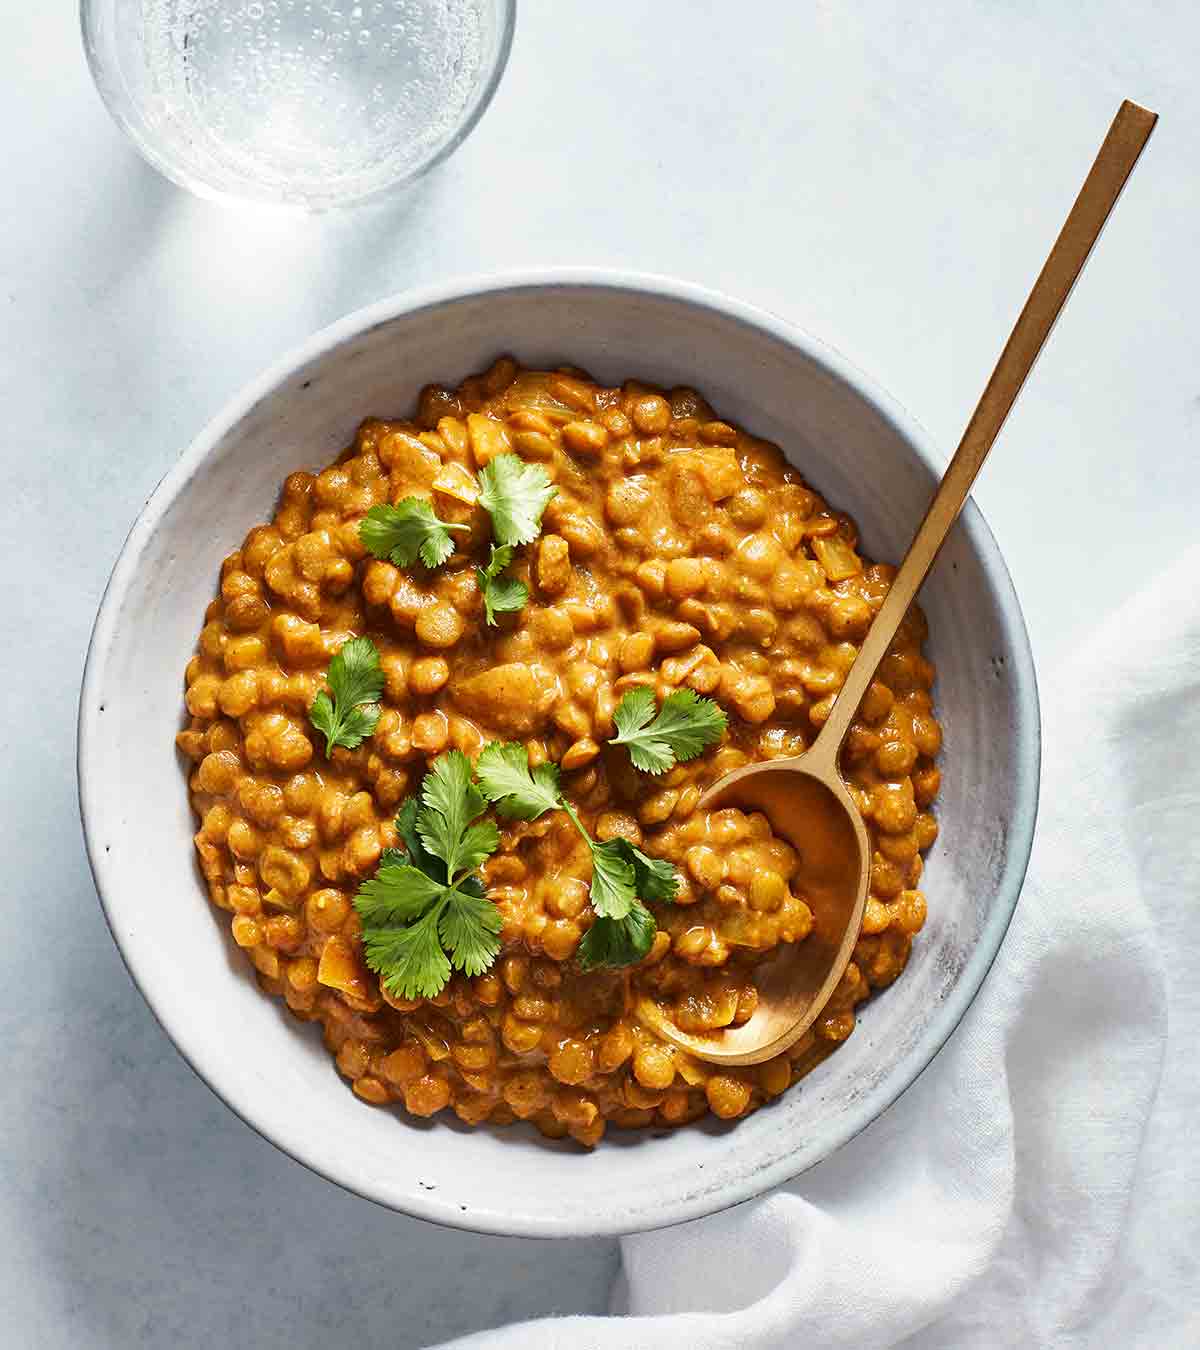 A white bowl filled with tikka masala lentil, garnished with cilantro, with a wooden spoon resting inside.